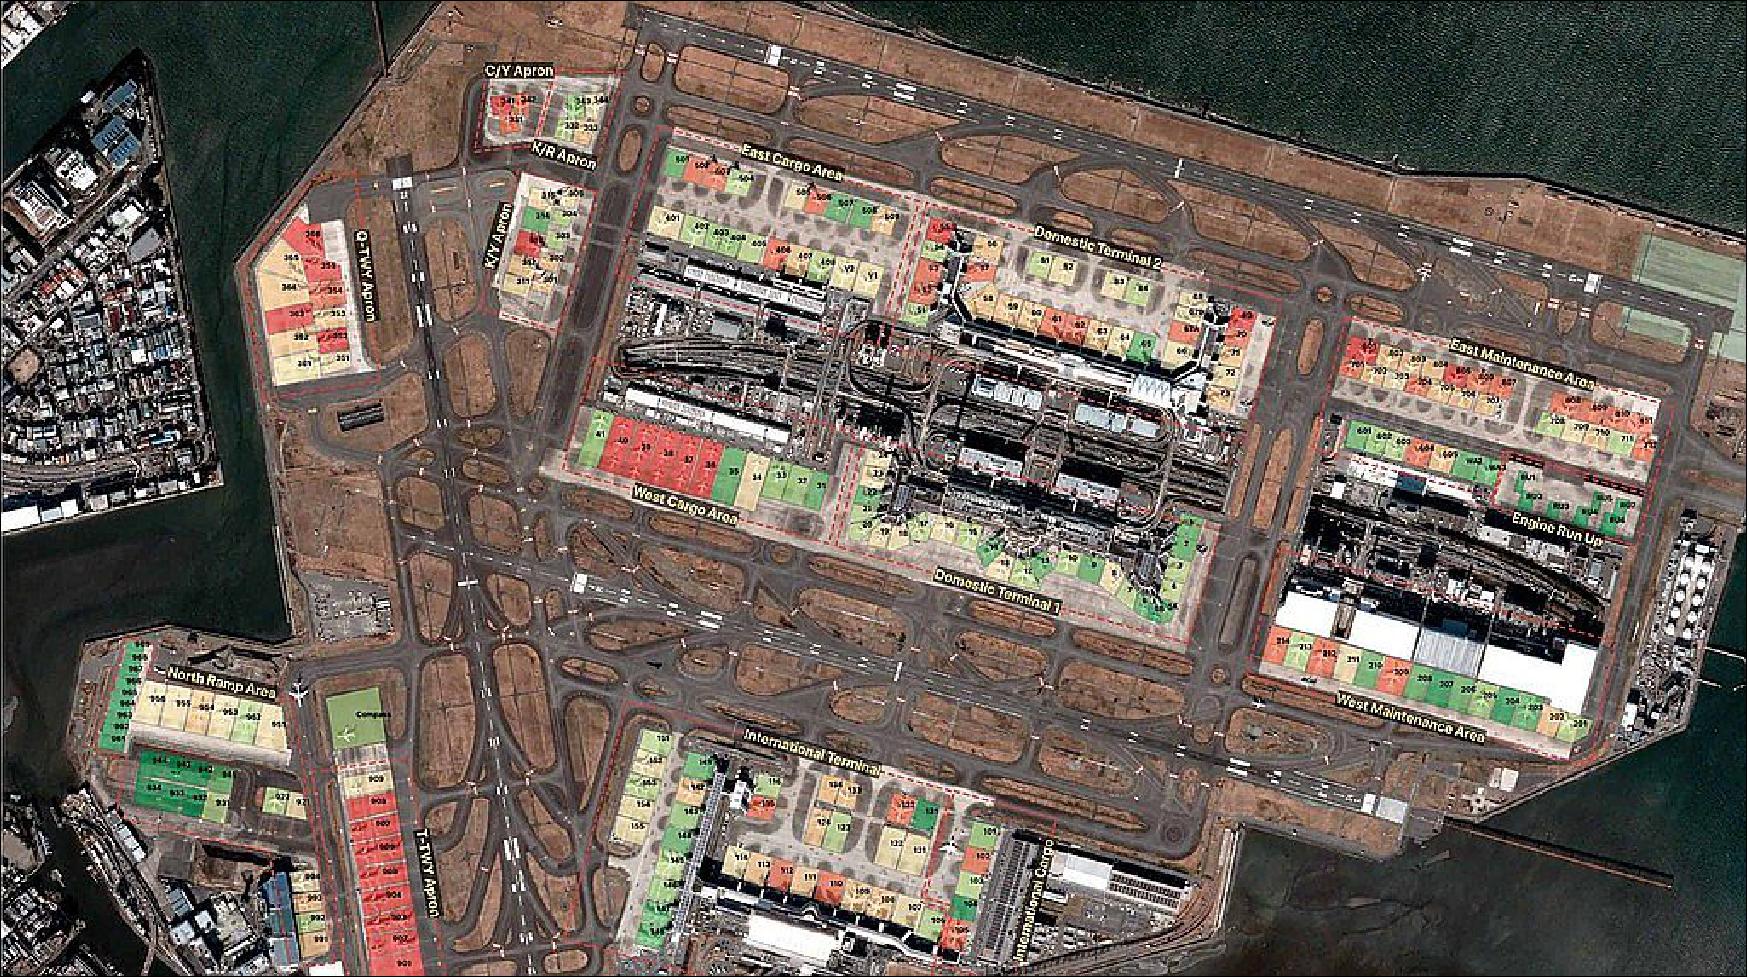 Figure 13: Using high-revisit satellite imagery, BlackSky’s Spectra AI has detected the utilization of major facilities at Tokyo’s Haneda Airport. Parking spaces shown in green are rarely used, while red indicates frequent occupancy. BlackSky customers can also understand inflow/outflow of cargo and monitor airline maintenance activity (image credit: BlackSky)